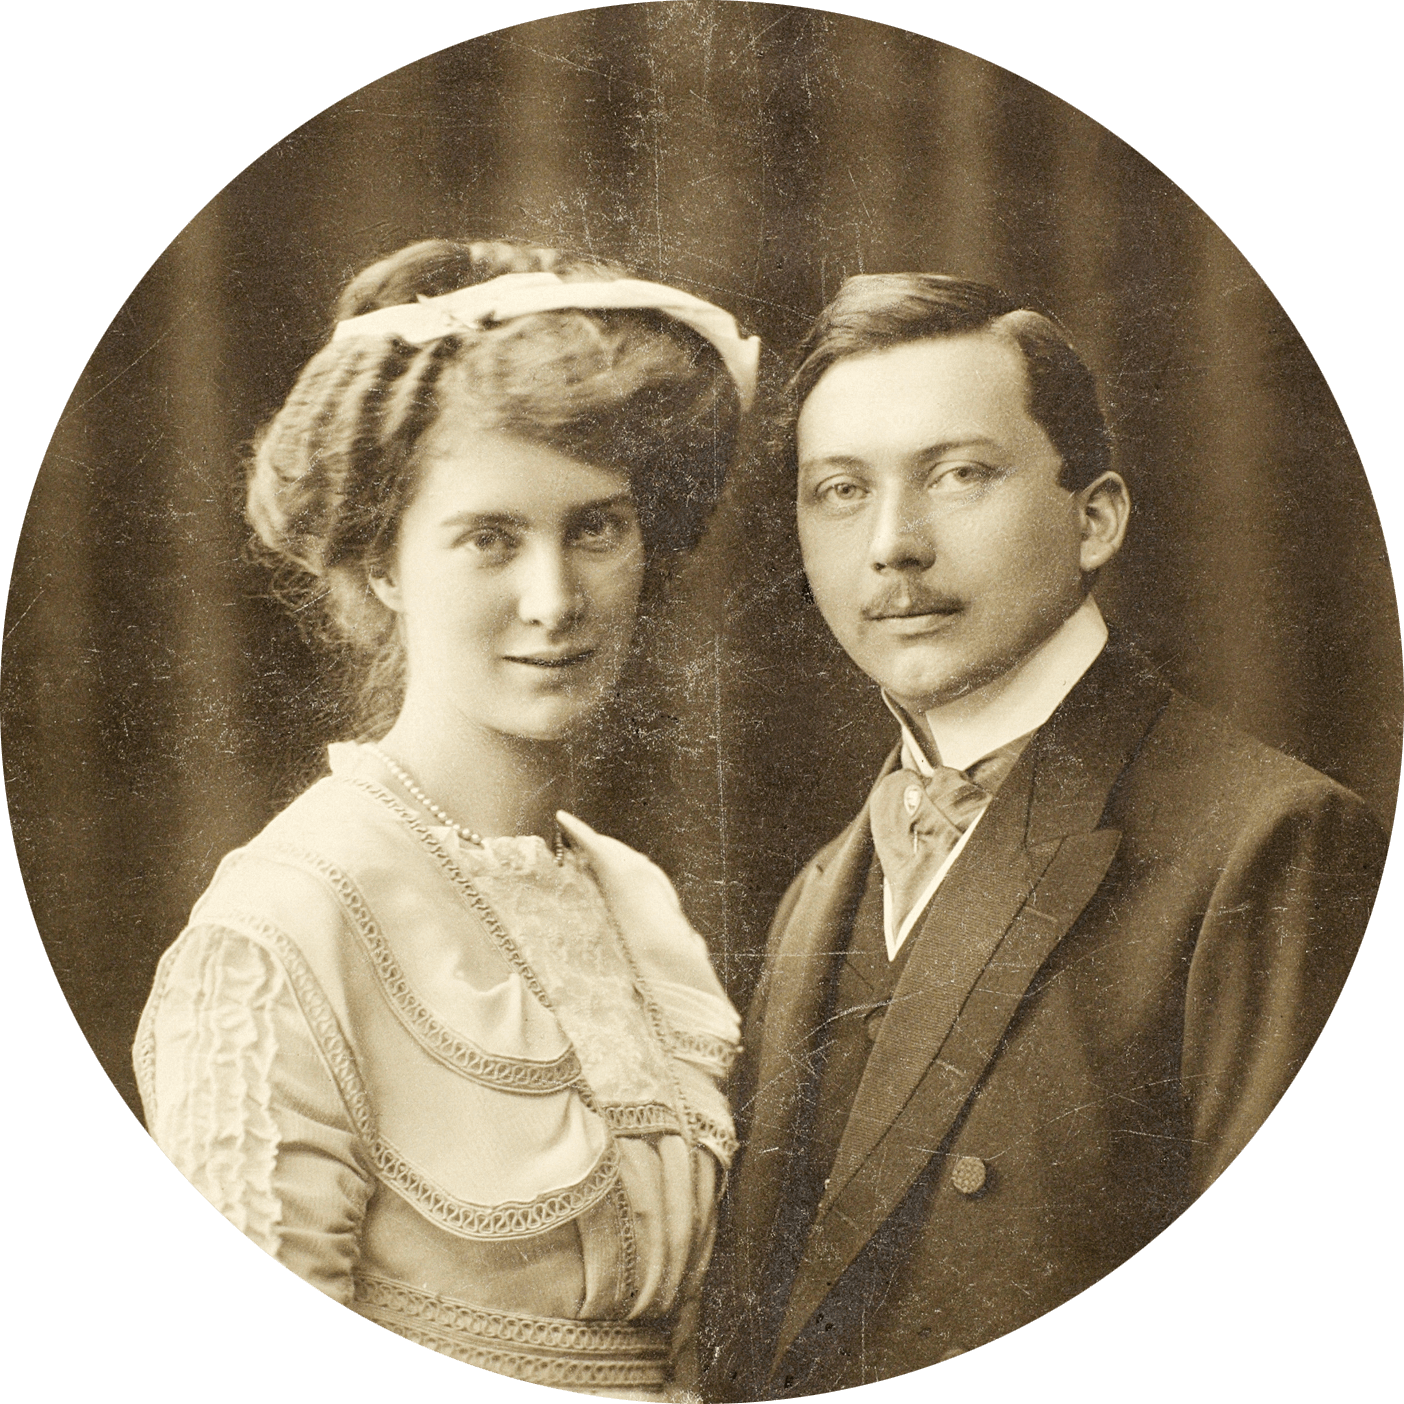 Engagement picture of Karl Kessler and Auguste Eisenmann. The marriage was in 1911.